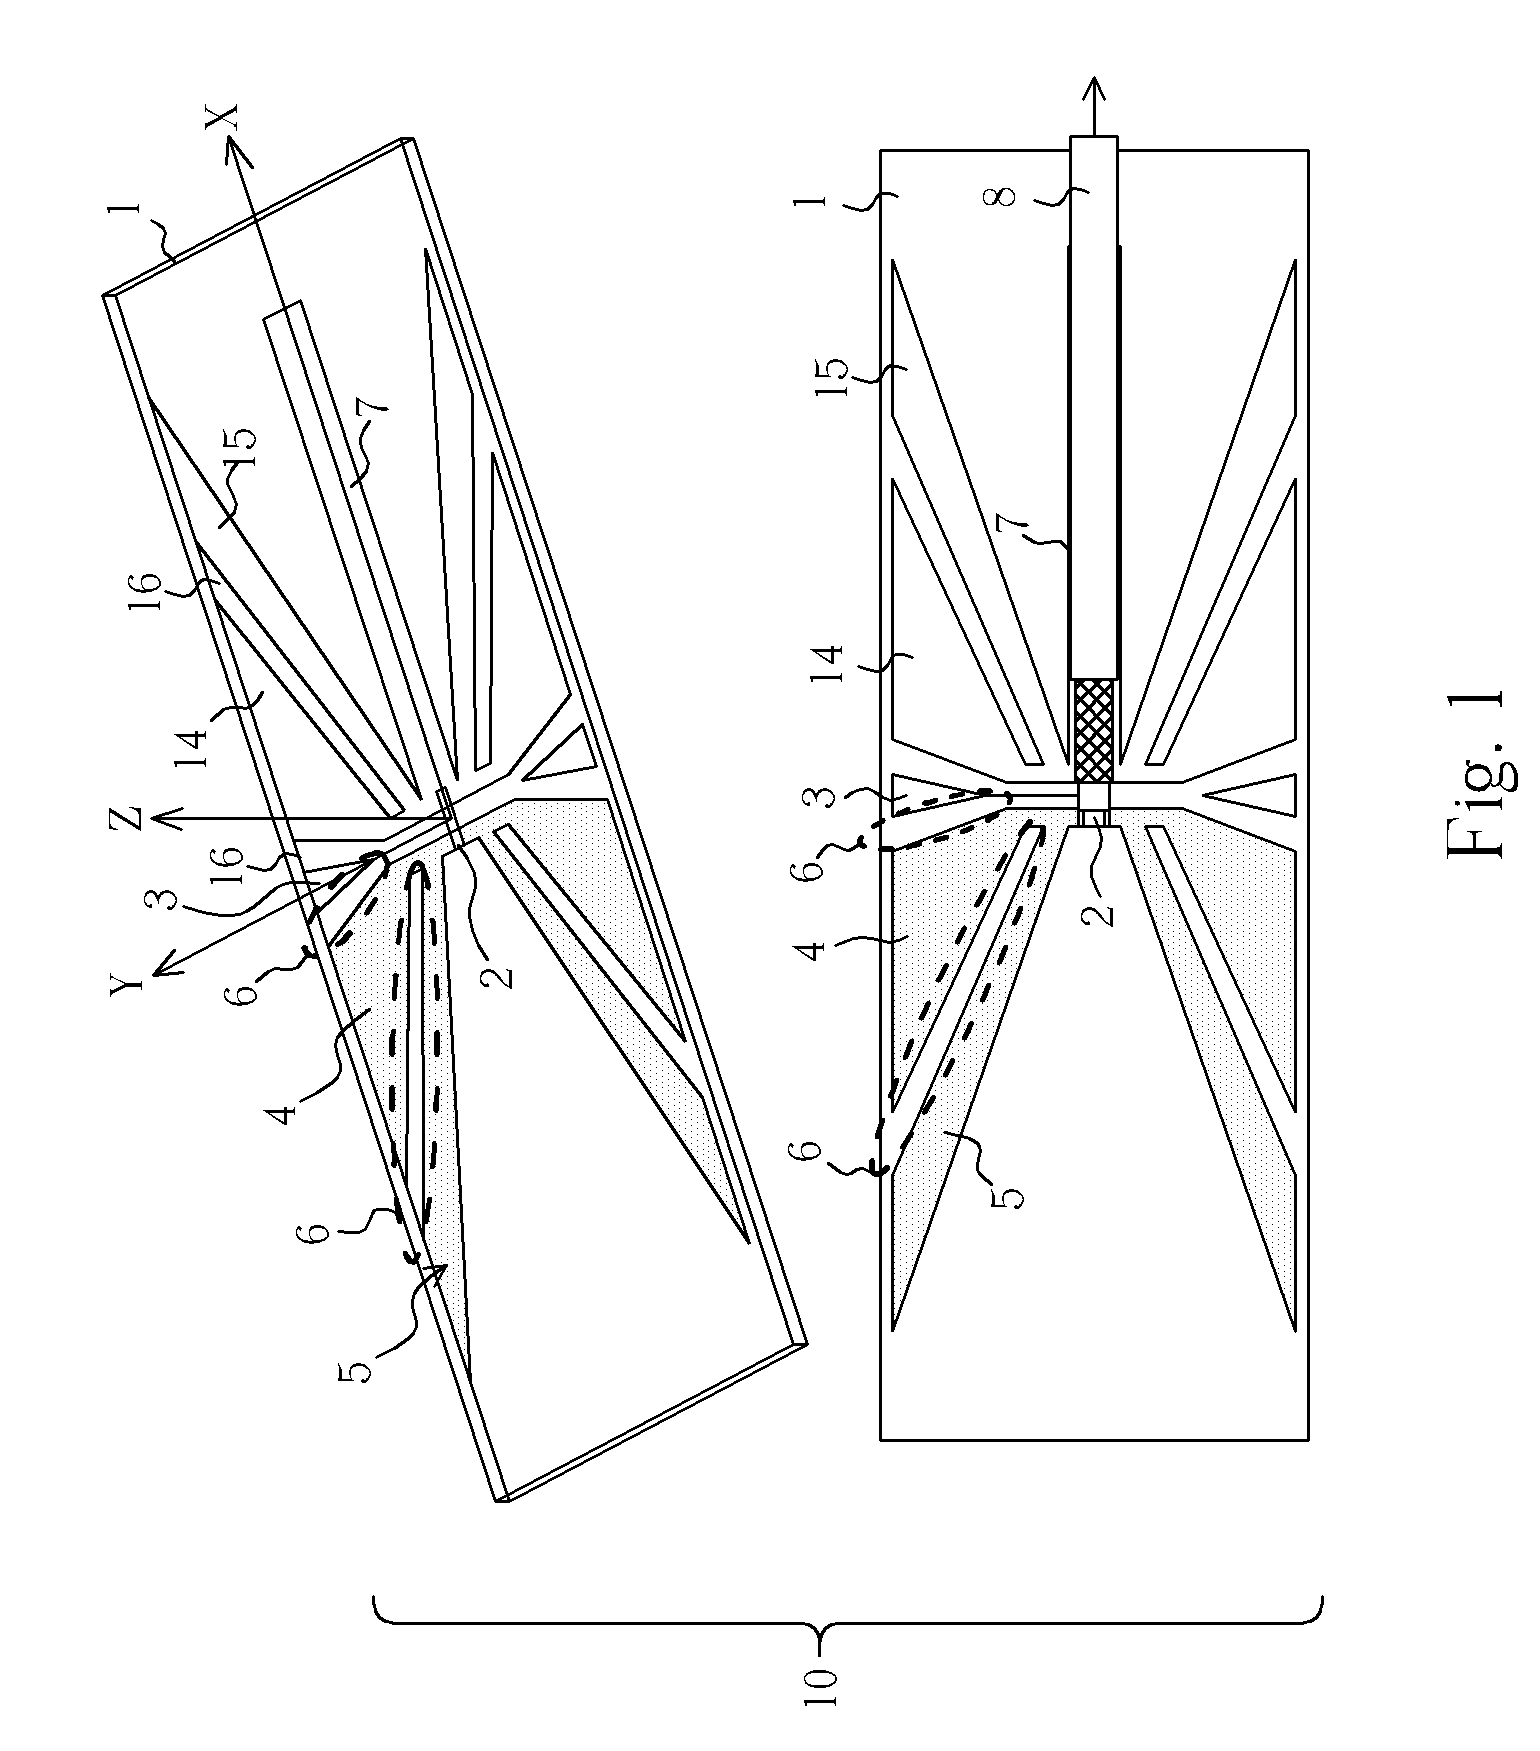 Compact multiple-frequency Z-type inverted-F antenna